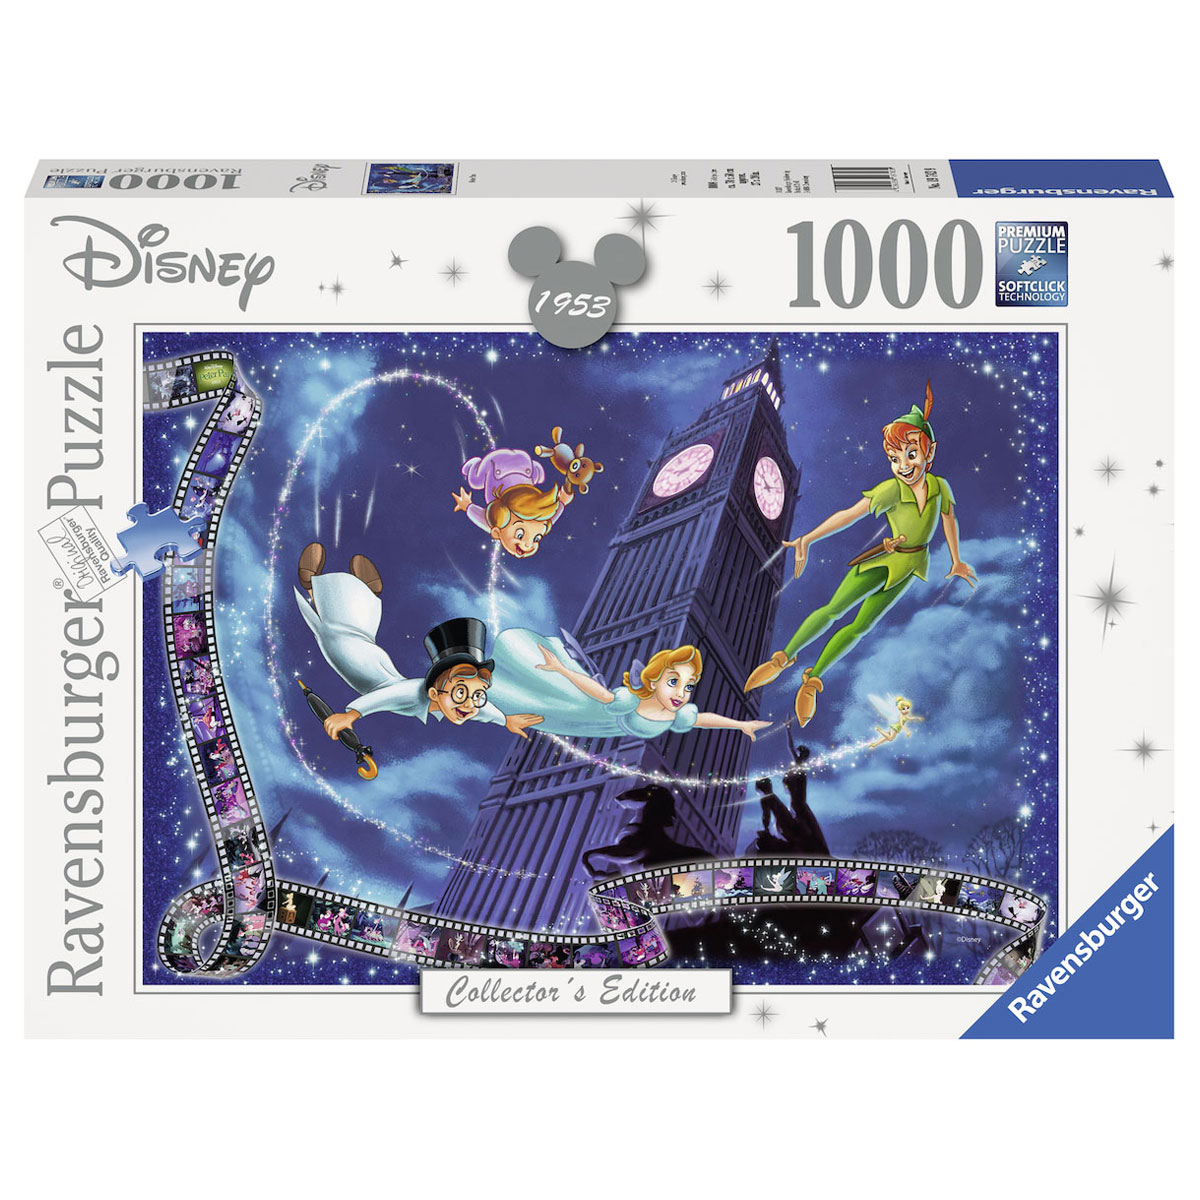 Disney Collector’s Edition Peter Pan, 1000st.